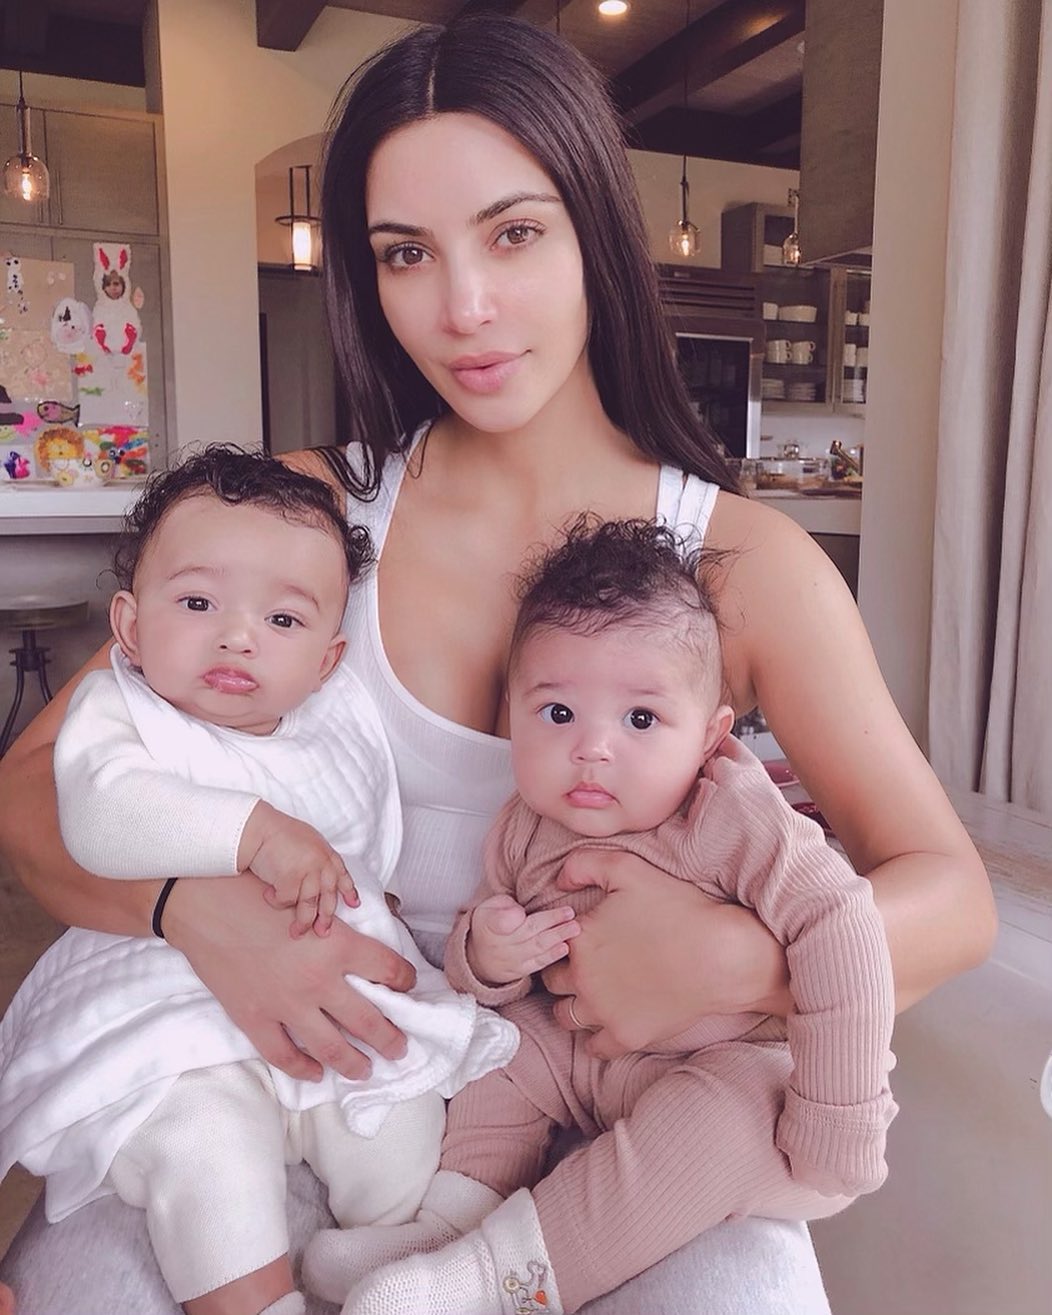 A photo showing Kim Kardashian holding her baby and her niece in both arms and they look very adorable.